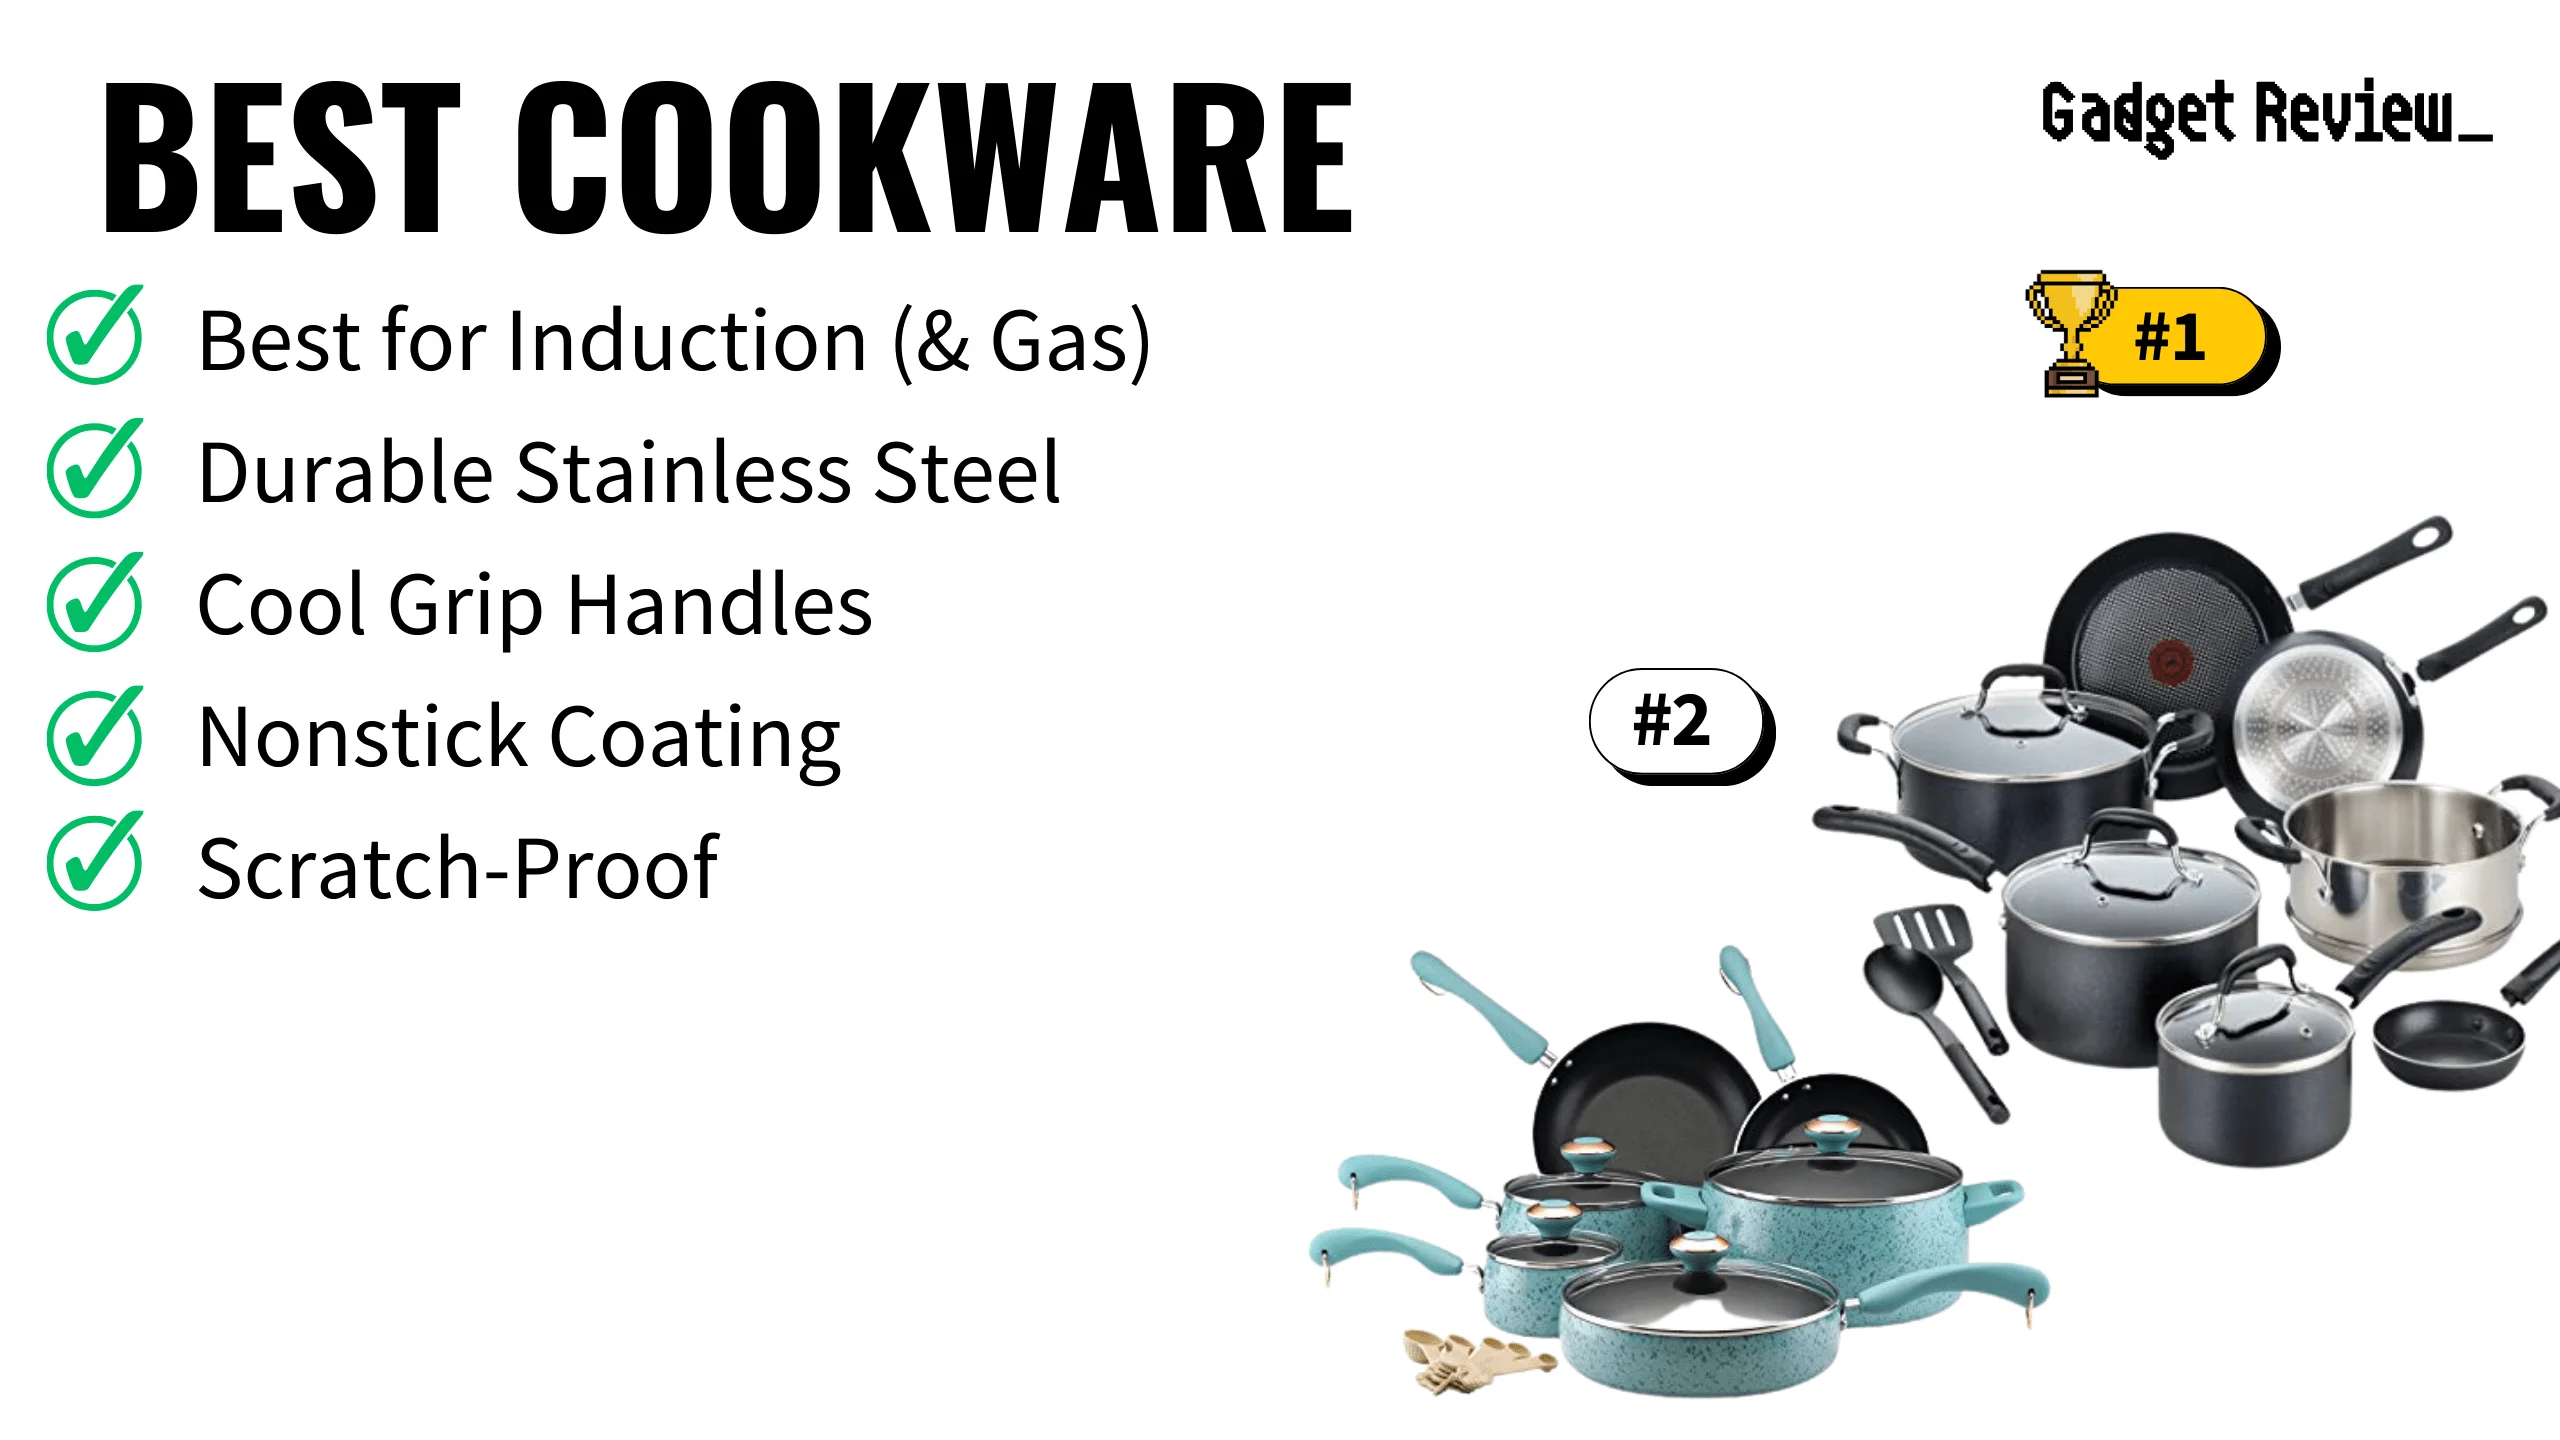 Egg Frying Pan Nonstick, Egg Pan Pancake Pan Sectional Frying Pan for  Breakfast, 3 Section Square Grill Pan Divided Frying Pan for Gas Stove &  Induction - Yahoo Shopping